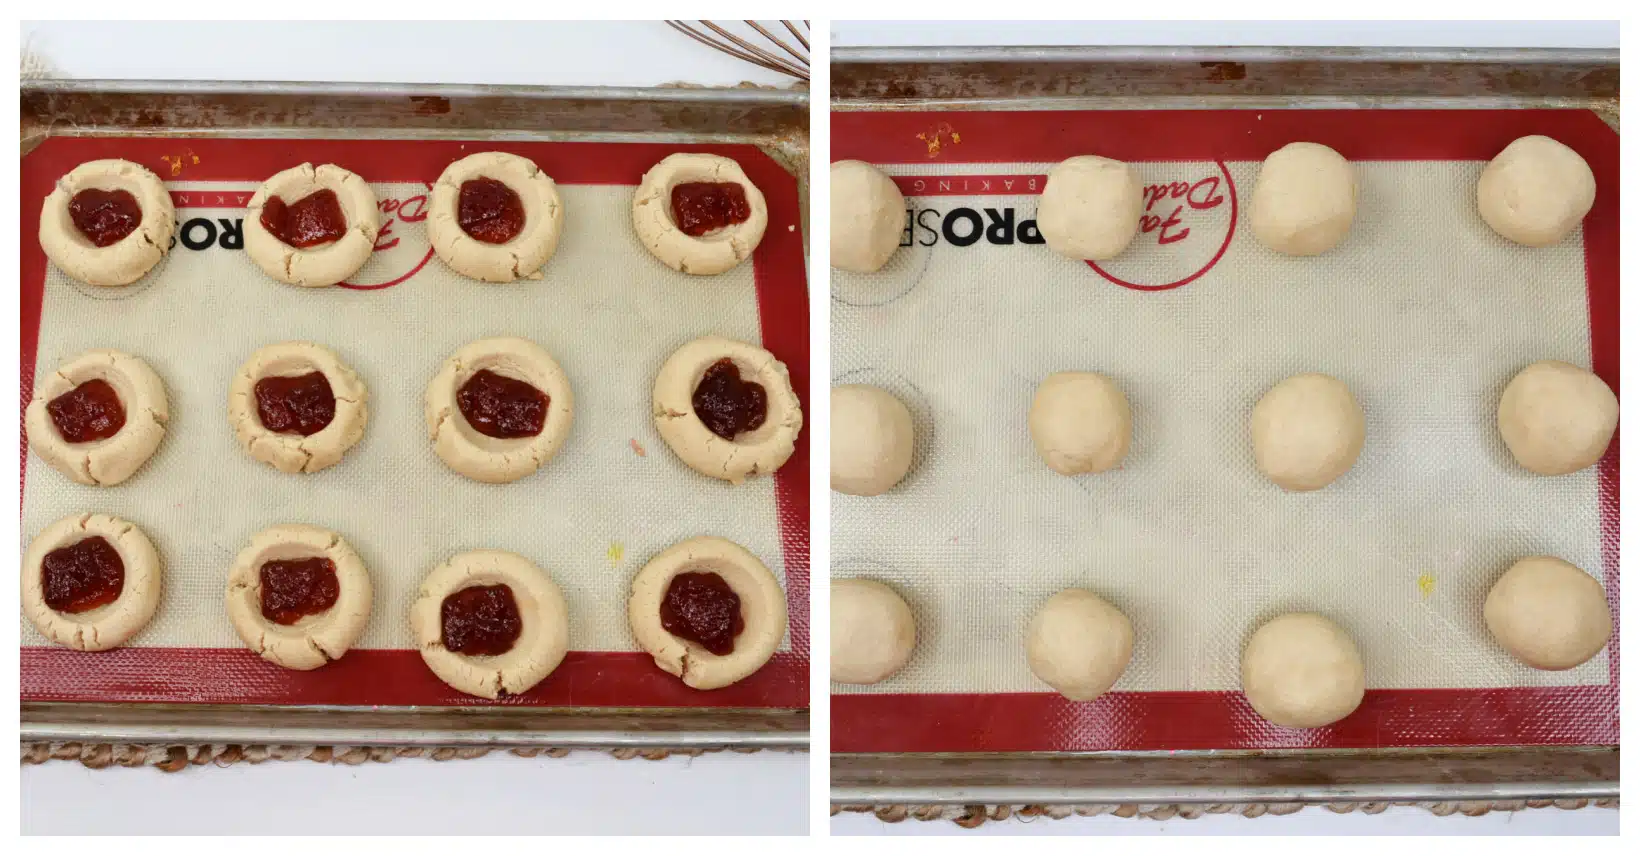 strawberry jam filling in cookie dough and cookie dough balls